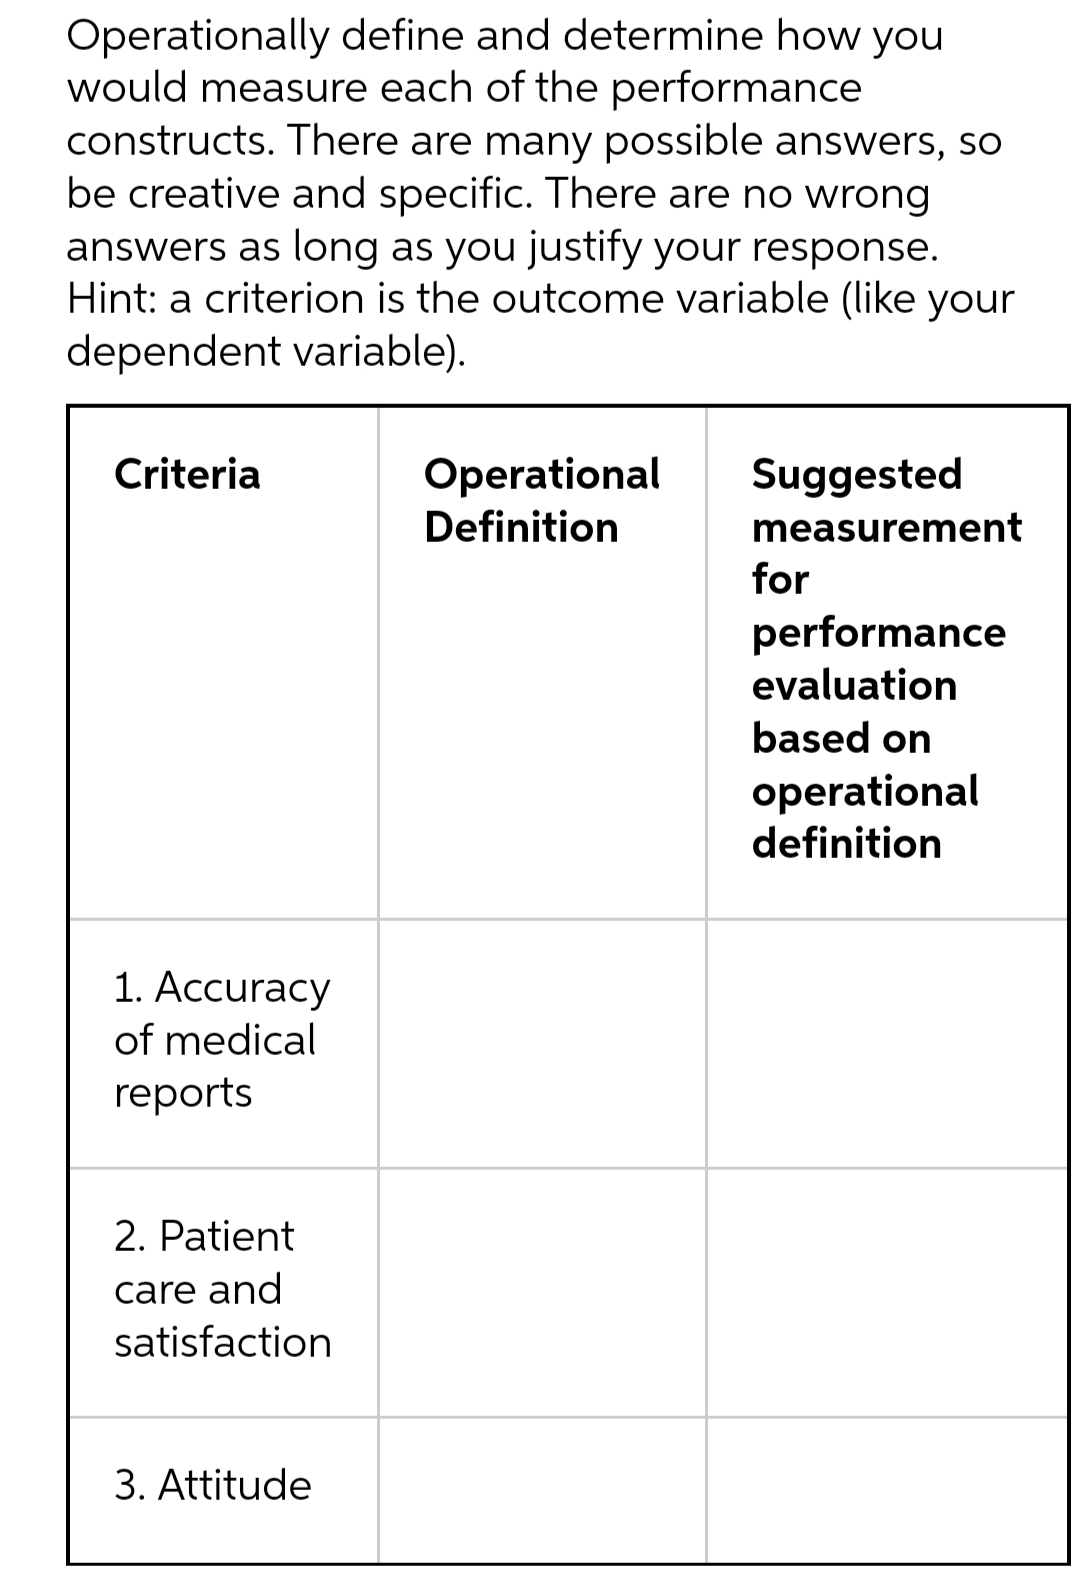 Operationally define and determine how you
would measure each of the performance
constructs. There are many possible answers, so
be creative and specific. There are no wrong
answers as long as you justify your response.
Hint: a criterion is the outcome variable (like your
dependent variable).
Criteria
1. Accuracy
of medical
reports
2. Patient
care and
satisfaction
3. Attitude
Operational
Definition
Suggested
measurement
for
performance
evaluation
based on
operational
definition